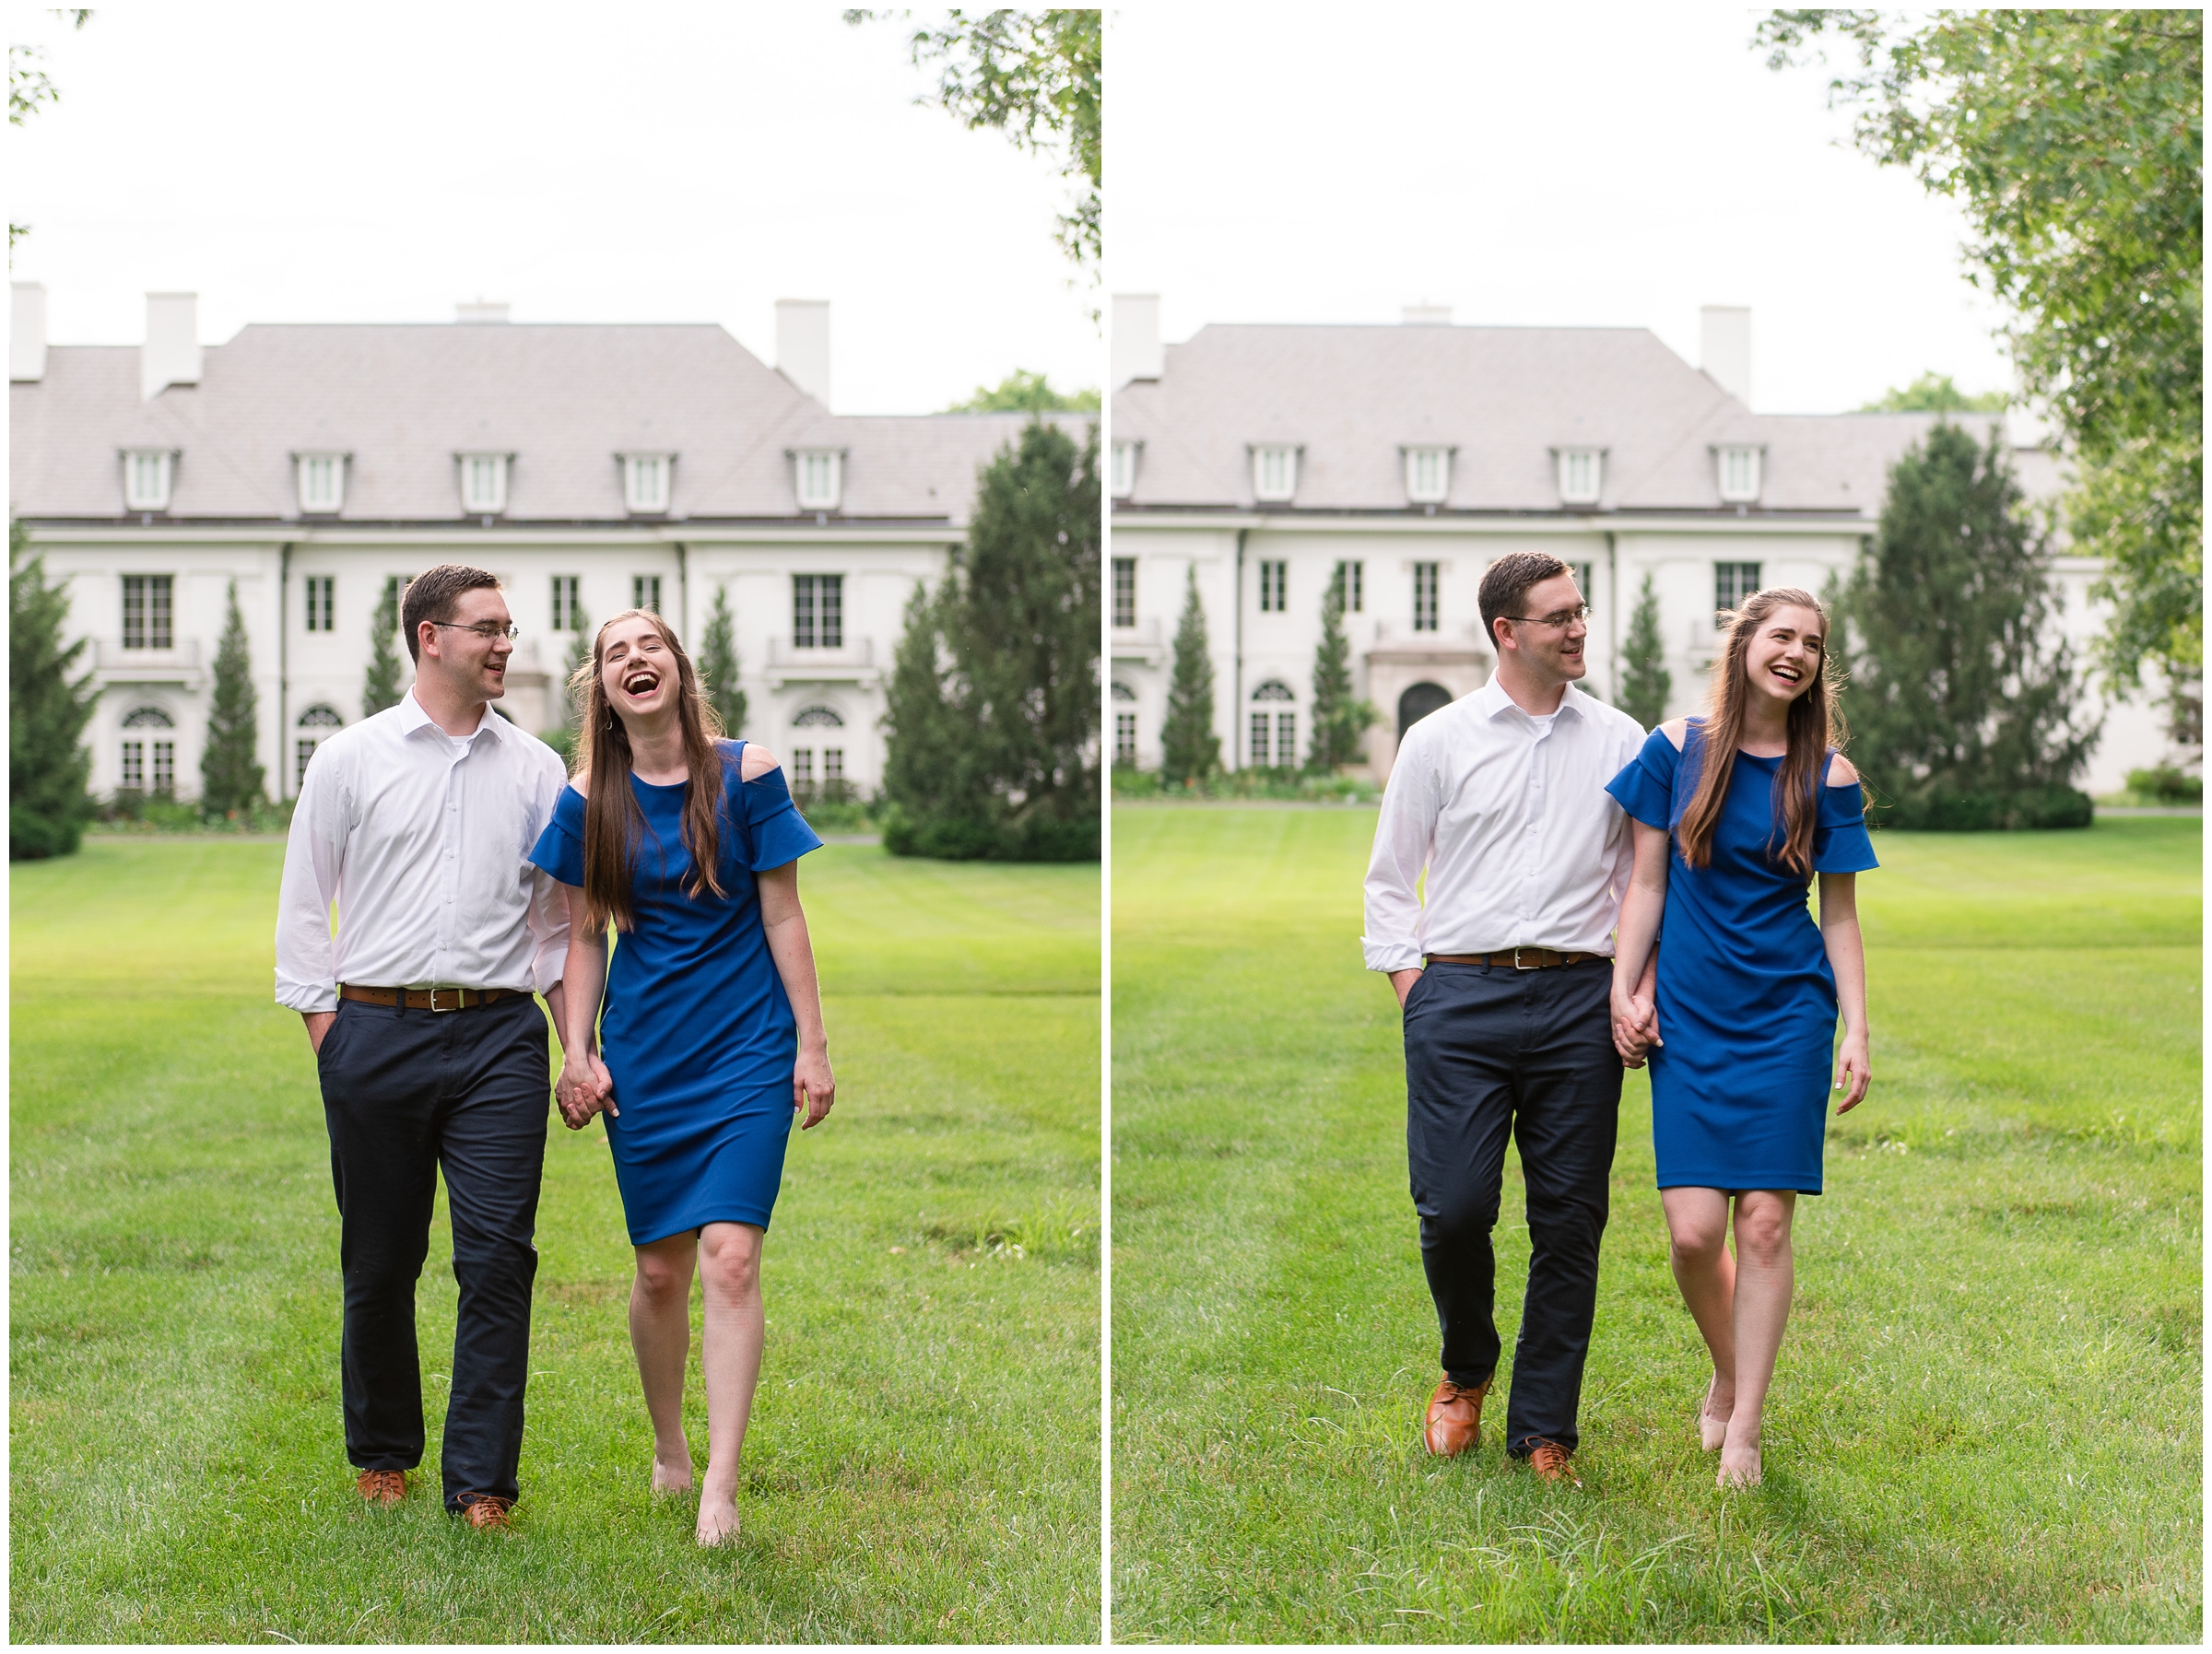 Lilly House Engagement Session - Newfields